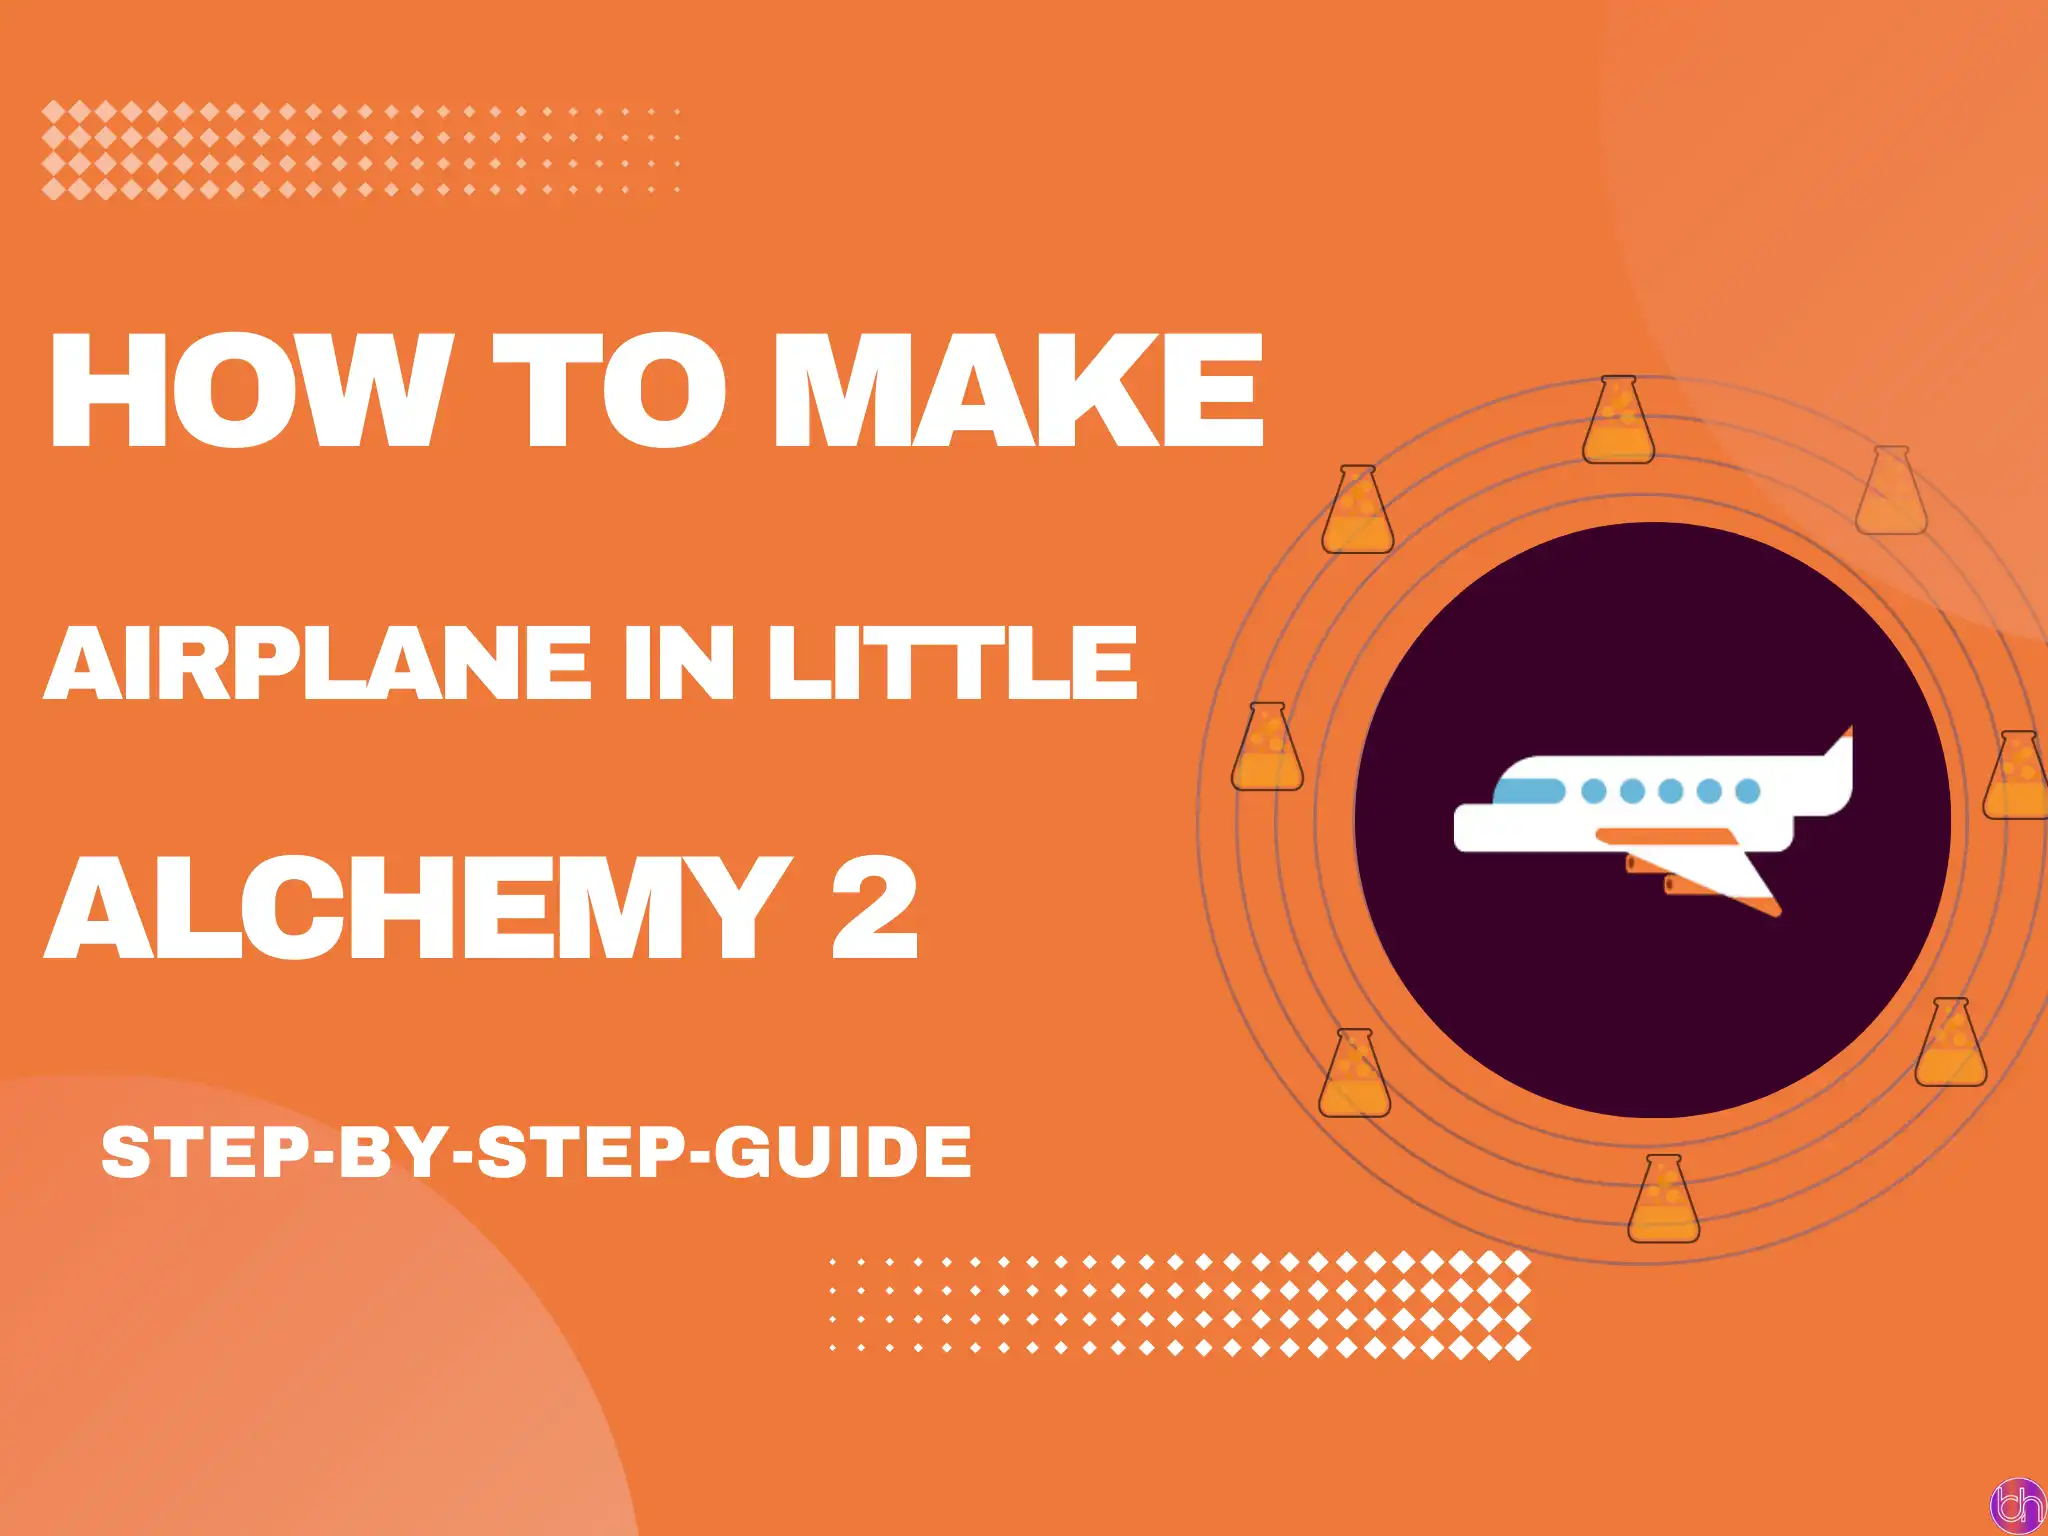 How to make Airplane in little alchemy 2